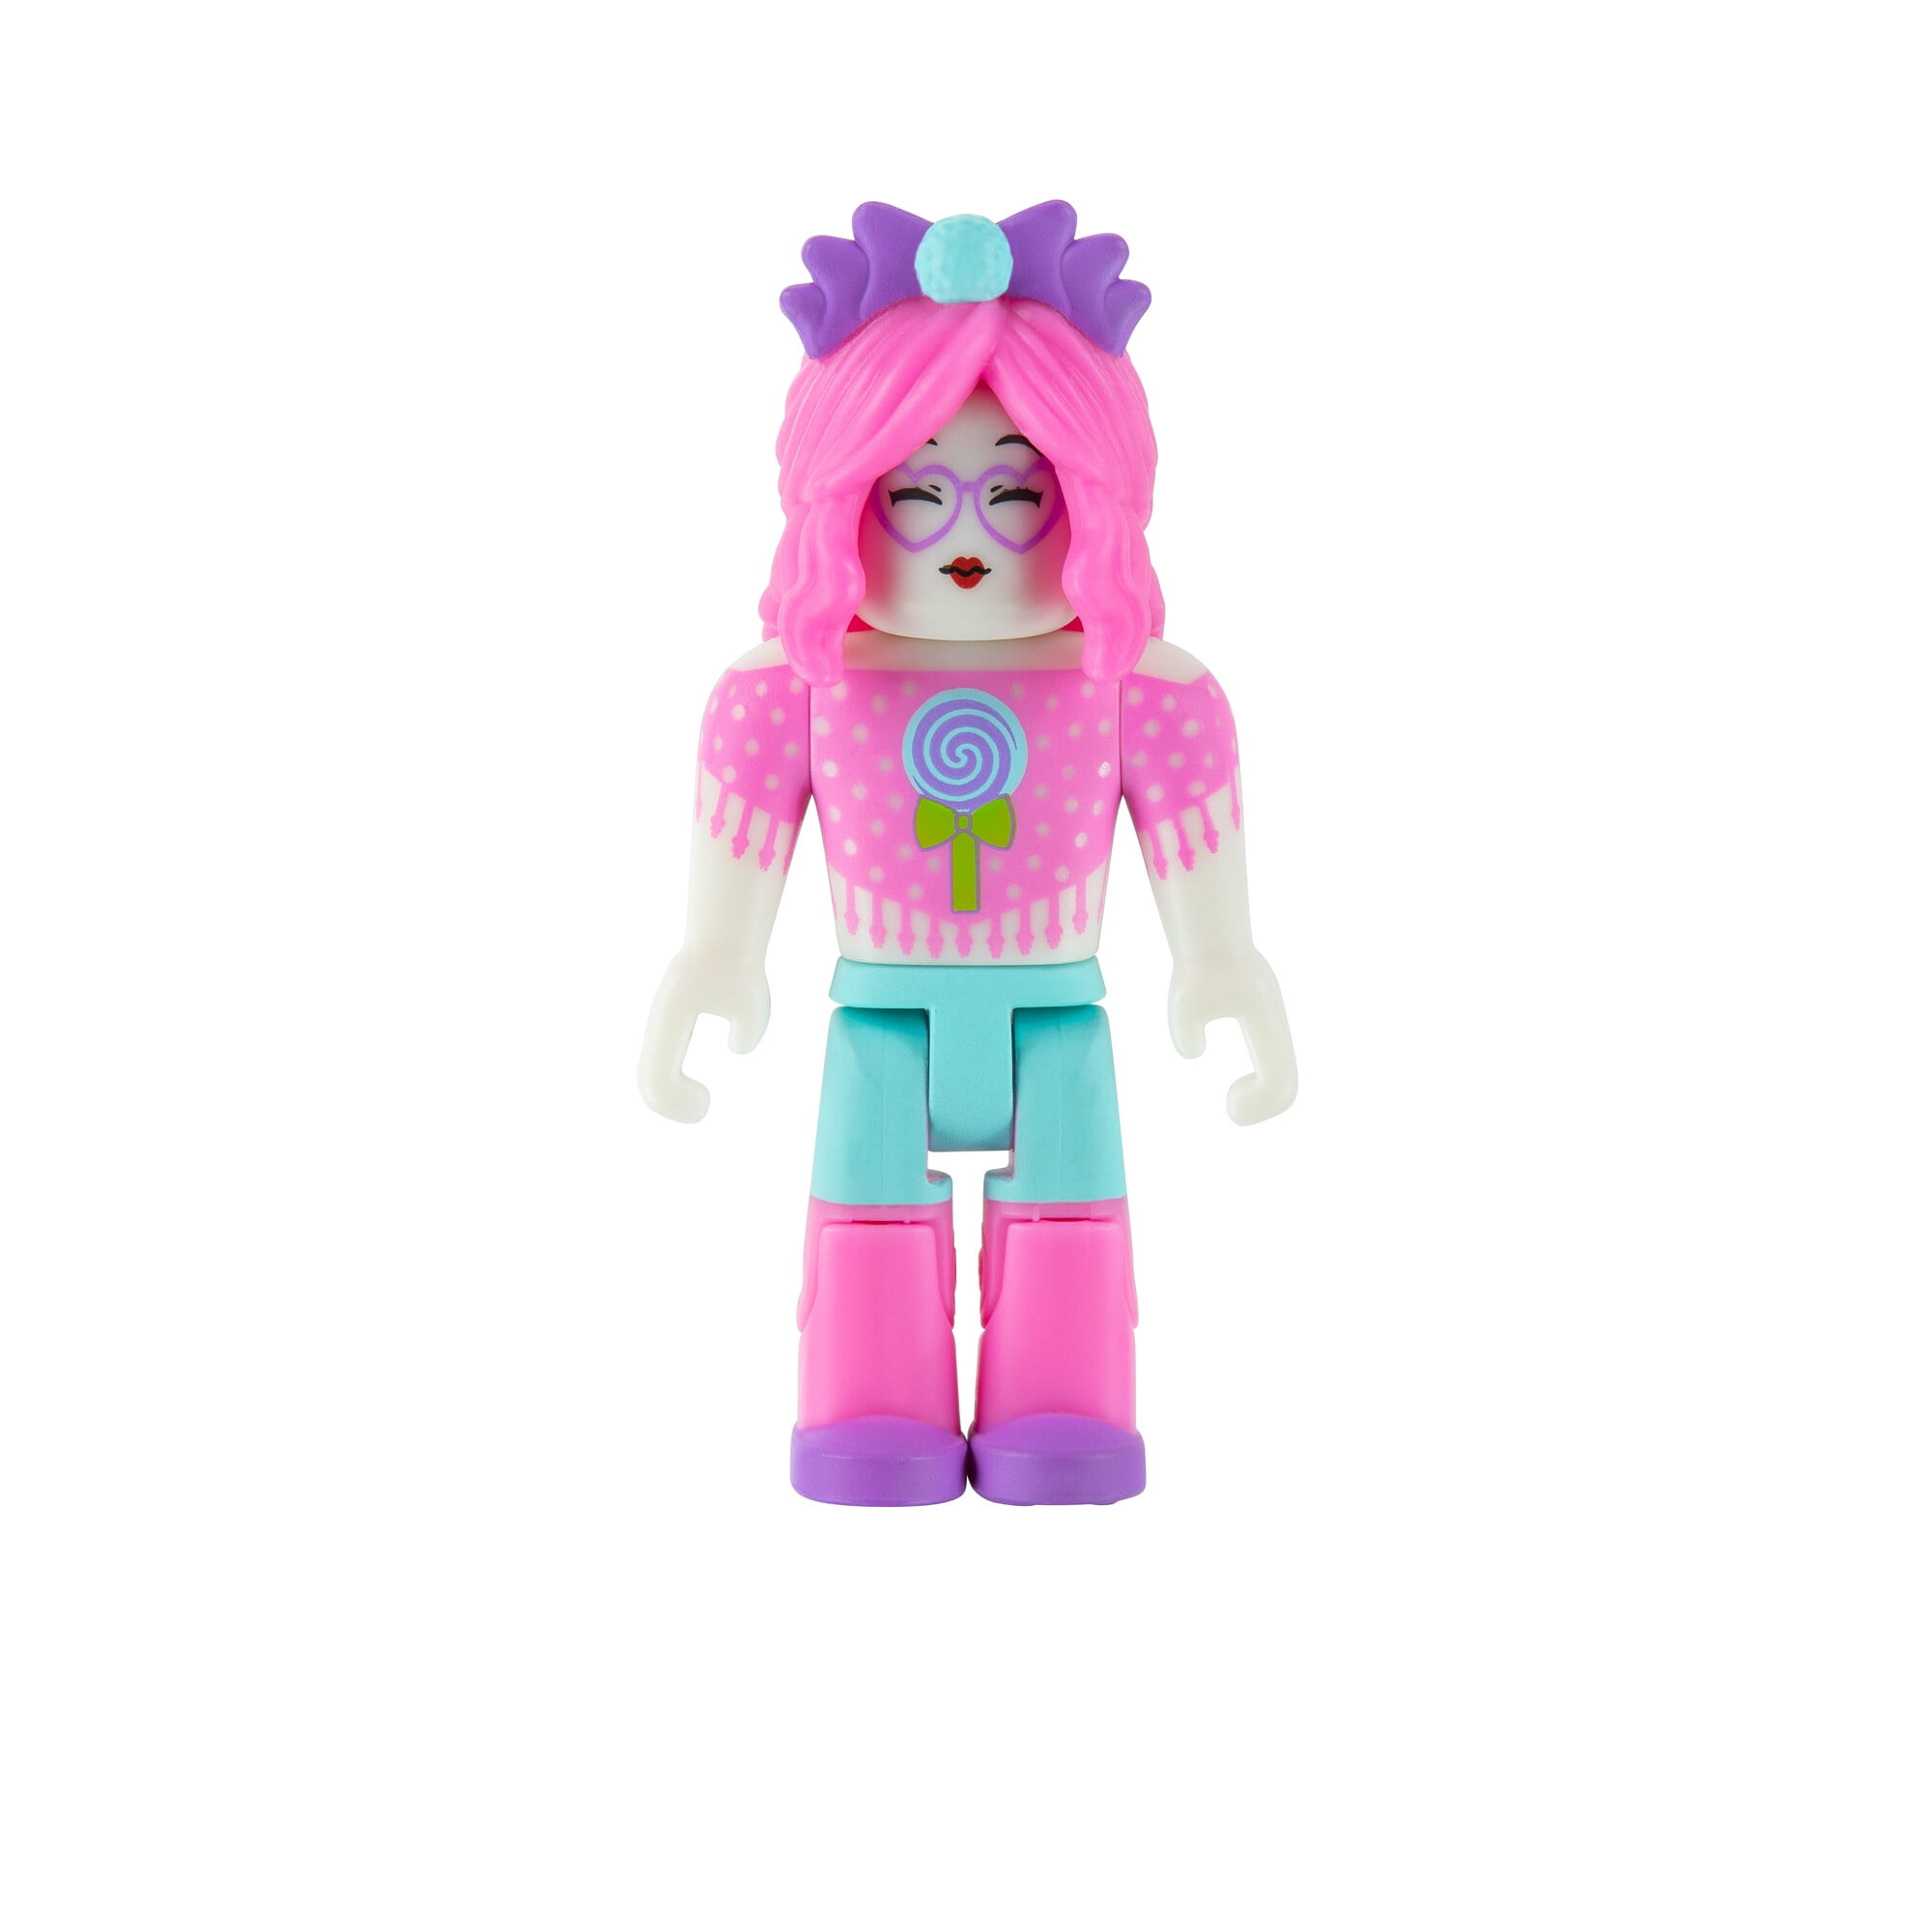  Roblox Action Collection - Star Sorority: Kandi's Ice Cream +  Two Mystery Figure Bundle [Includes 3 Exclusive Virtual Items], Deluxe  Blind + 2 Mystery Figures - Style 6 : Toys & Games